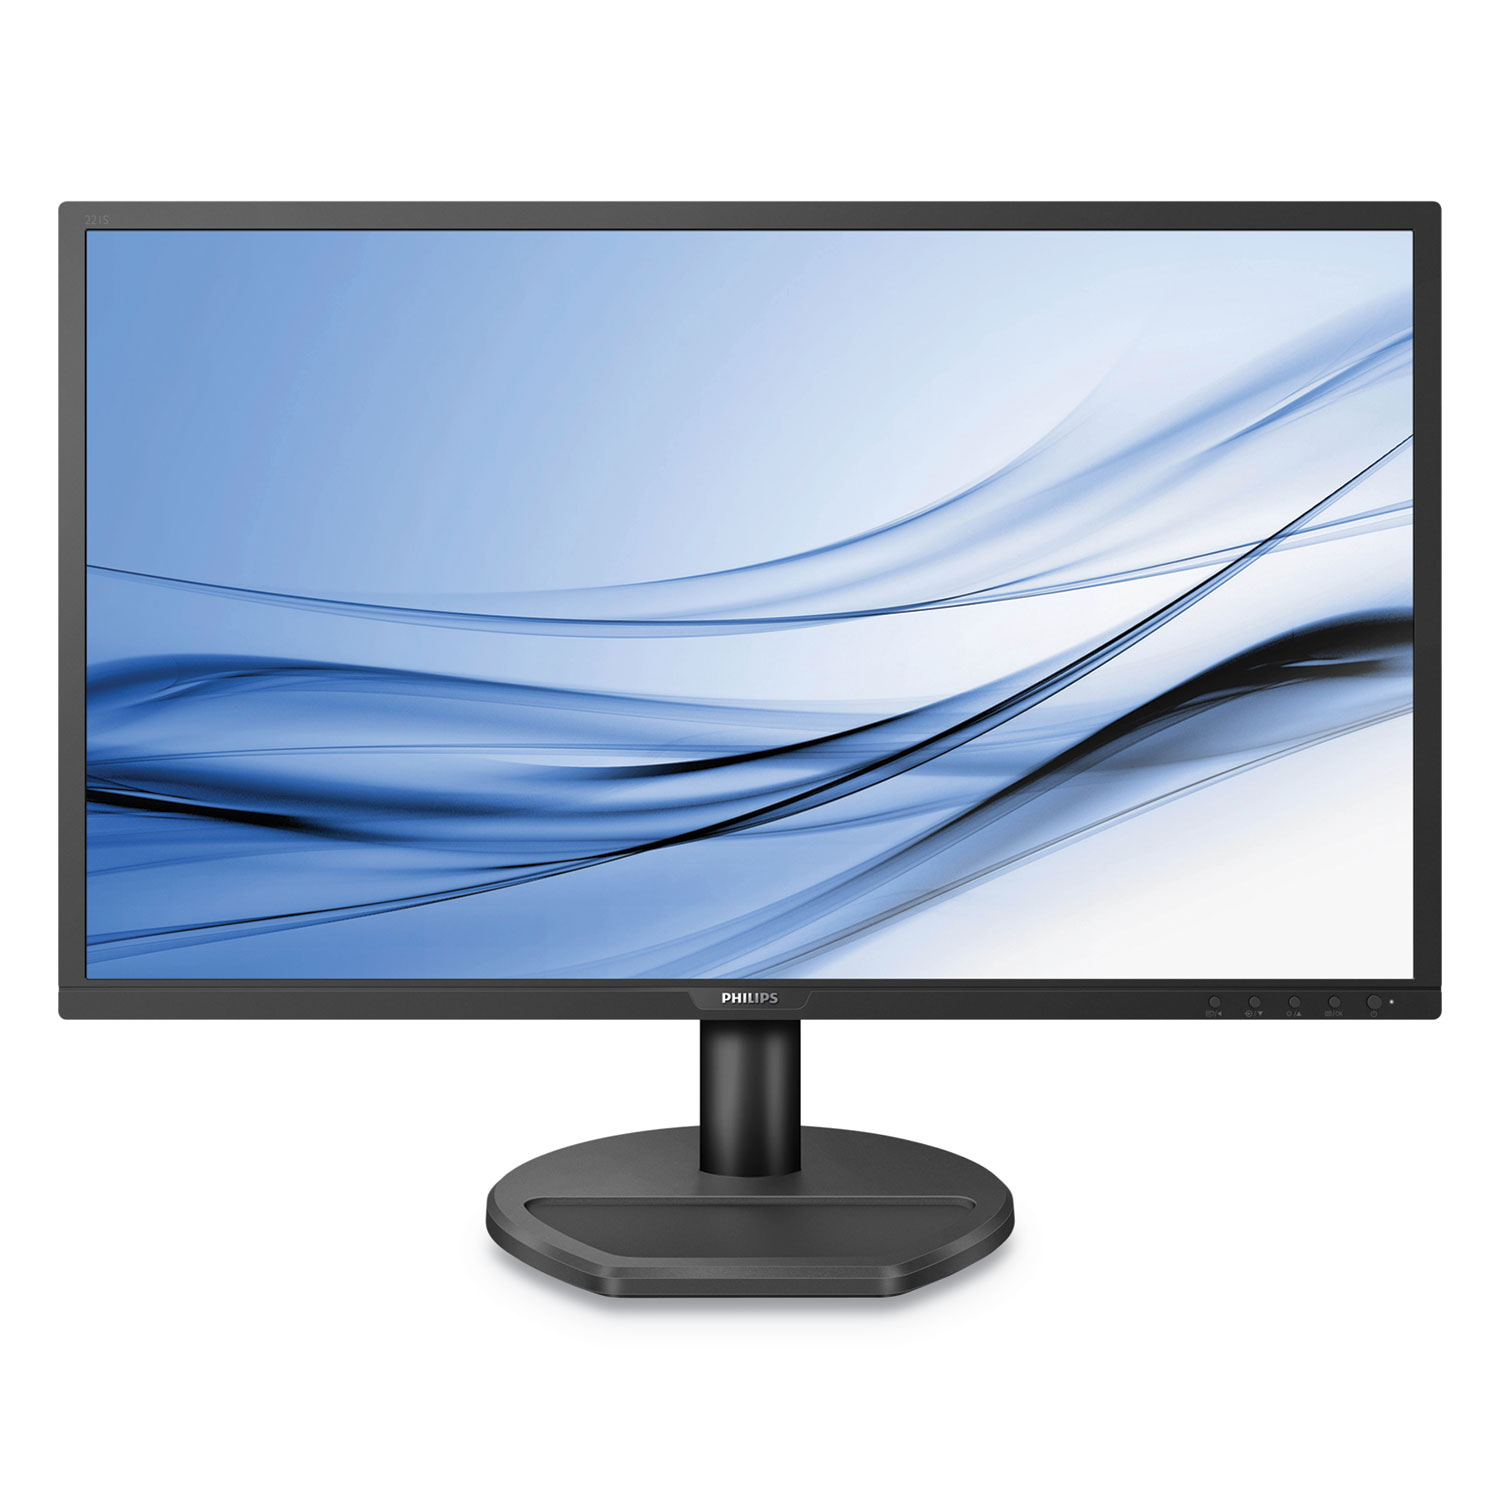  Philips 221S8LDSB S-Line LCD Monitor, 22 Widescreen, 16:9 Aspect Ratio (PSP221S8LDSB) 